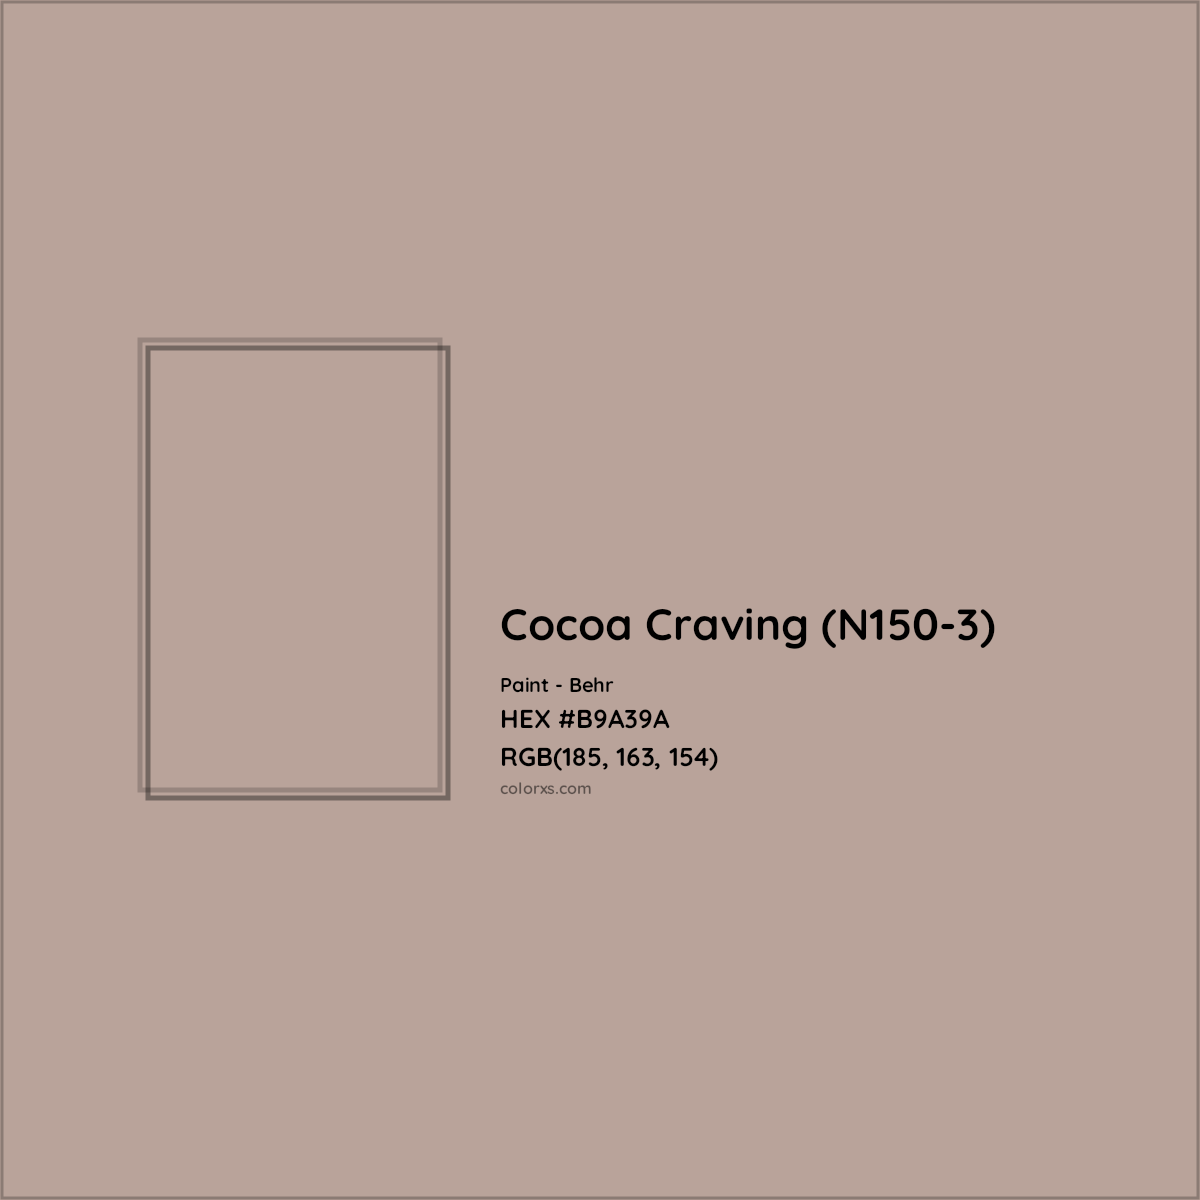 HEX #B9A39A Cocoa Craving (N150-3) Paint Behr - Color Code